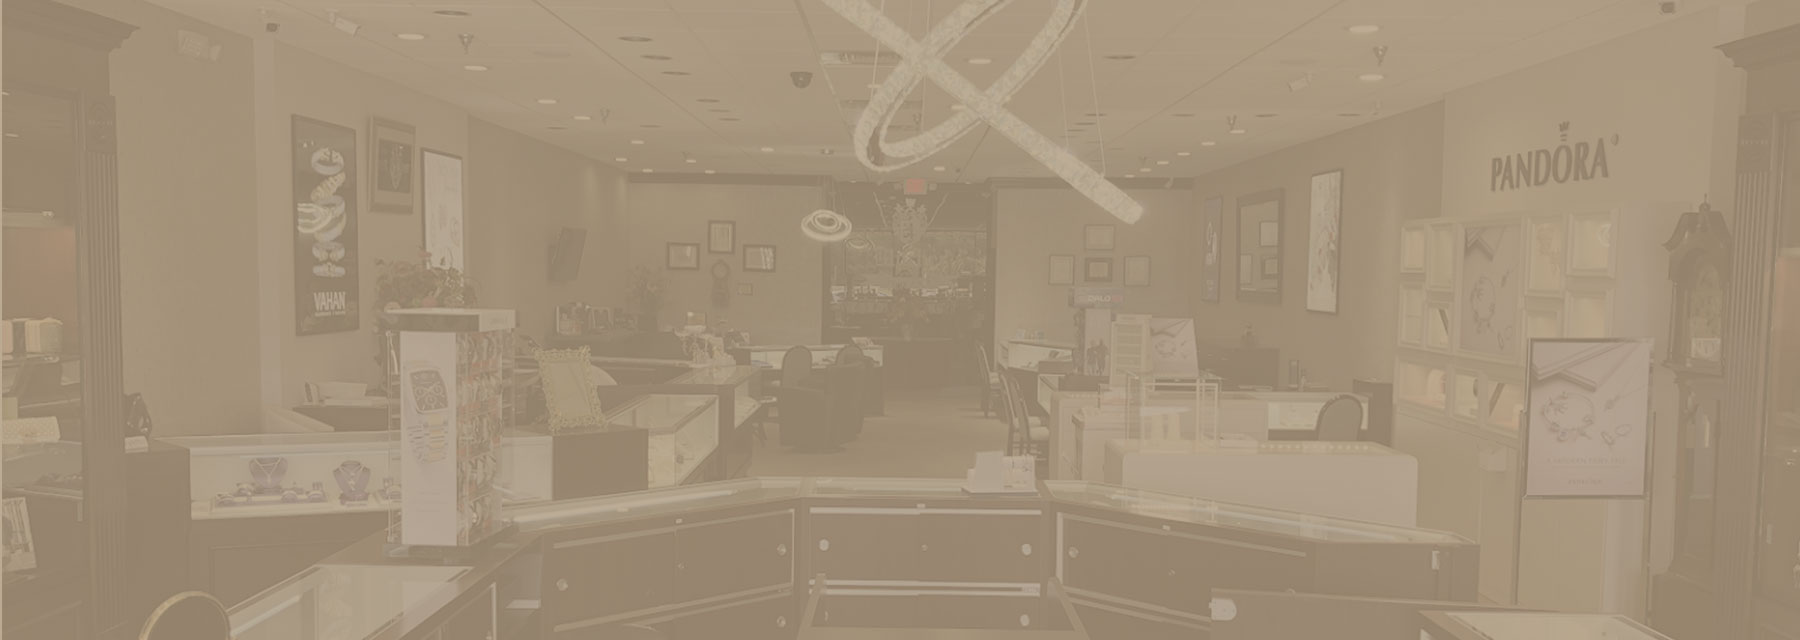  we are a 4th generation shopSince 1907  Blocher Jewelers Ellwood City, PA